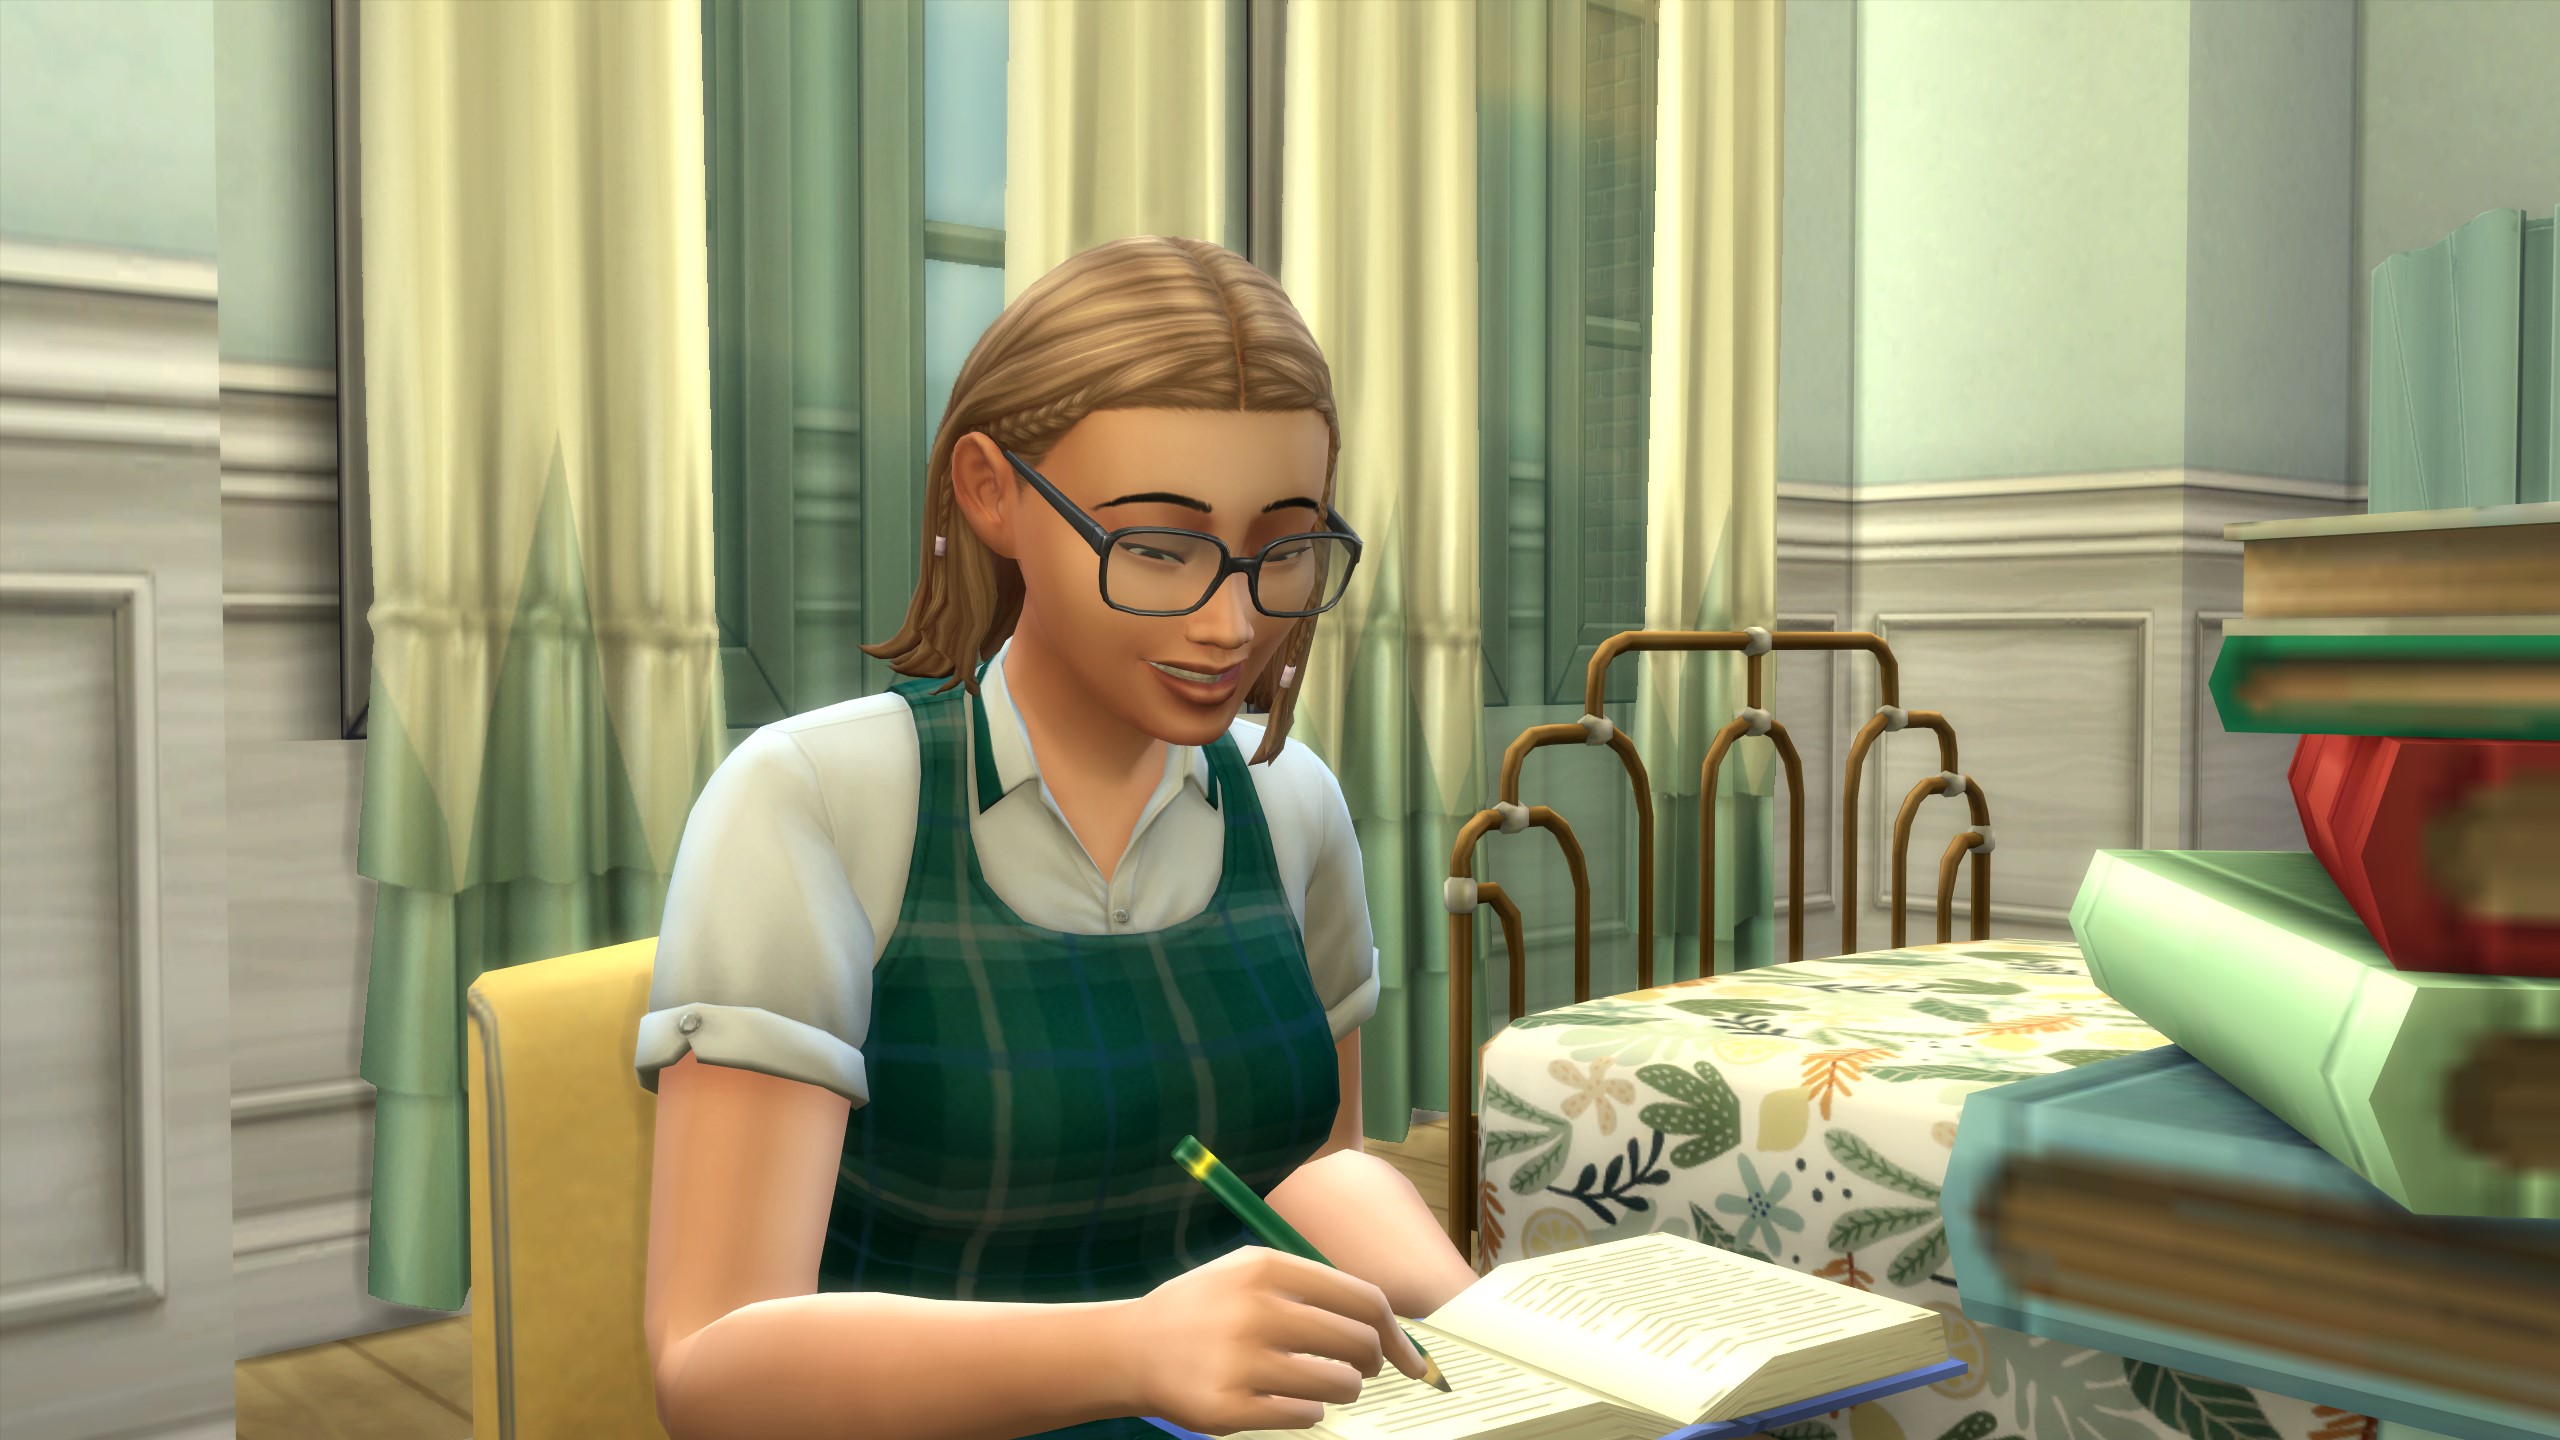  How to do your homework in The Sims 4 